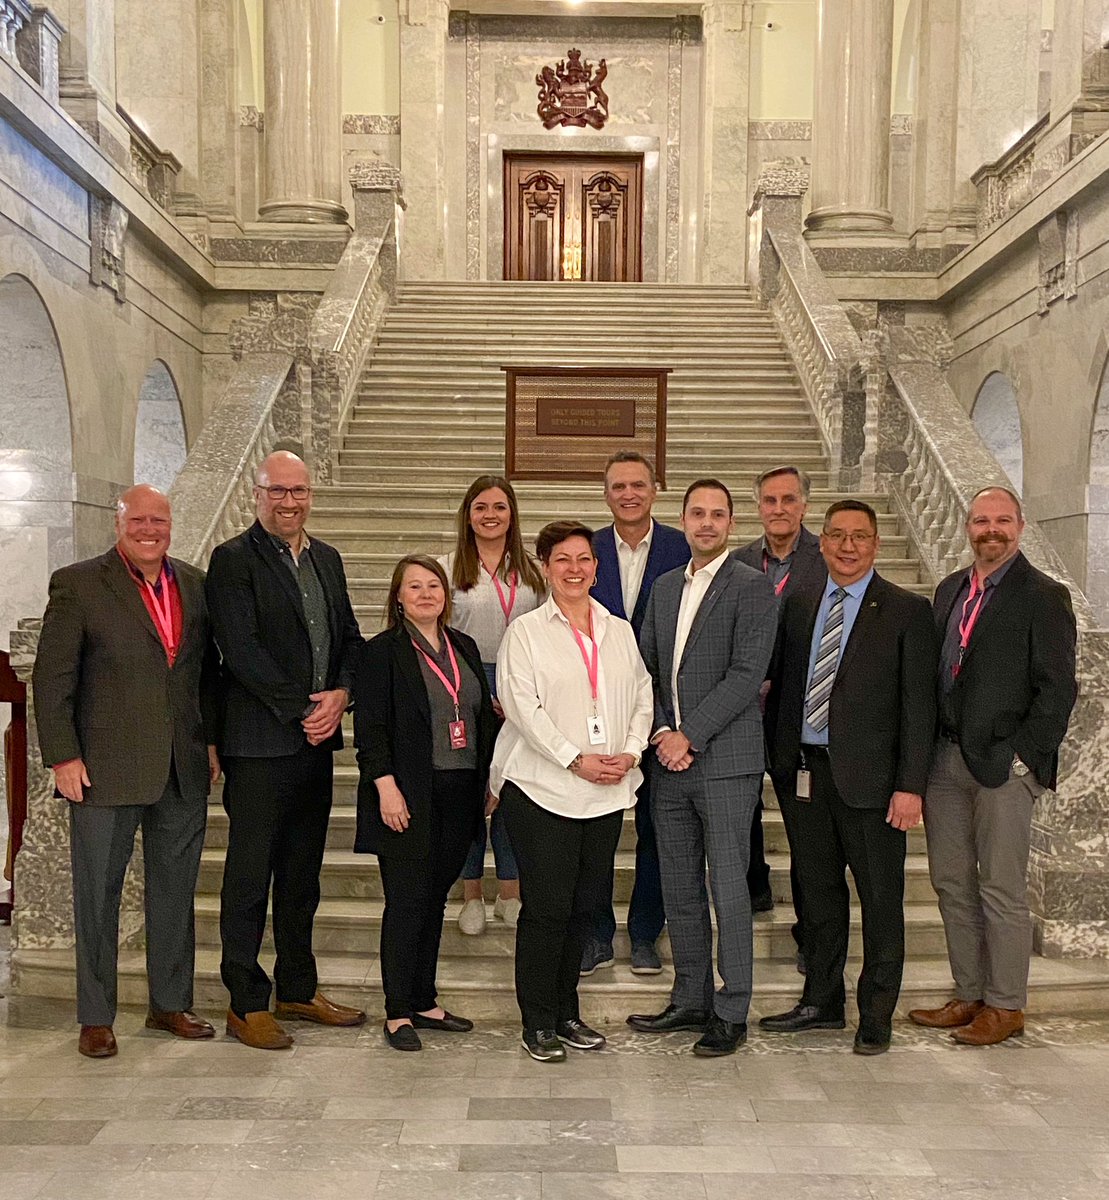 On Thursday I joined @PeterGuthrie99 and @TanyYao to meet with members of the Western Retail Lumber Association to discuss our collaboration on workforce development. WRLA members supply lumber and building materials across Western Canada and employ thousands of Albertans.